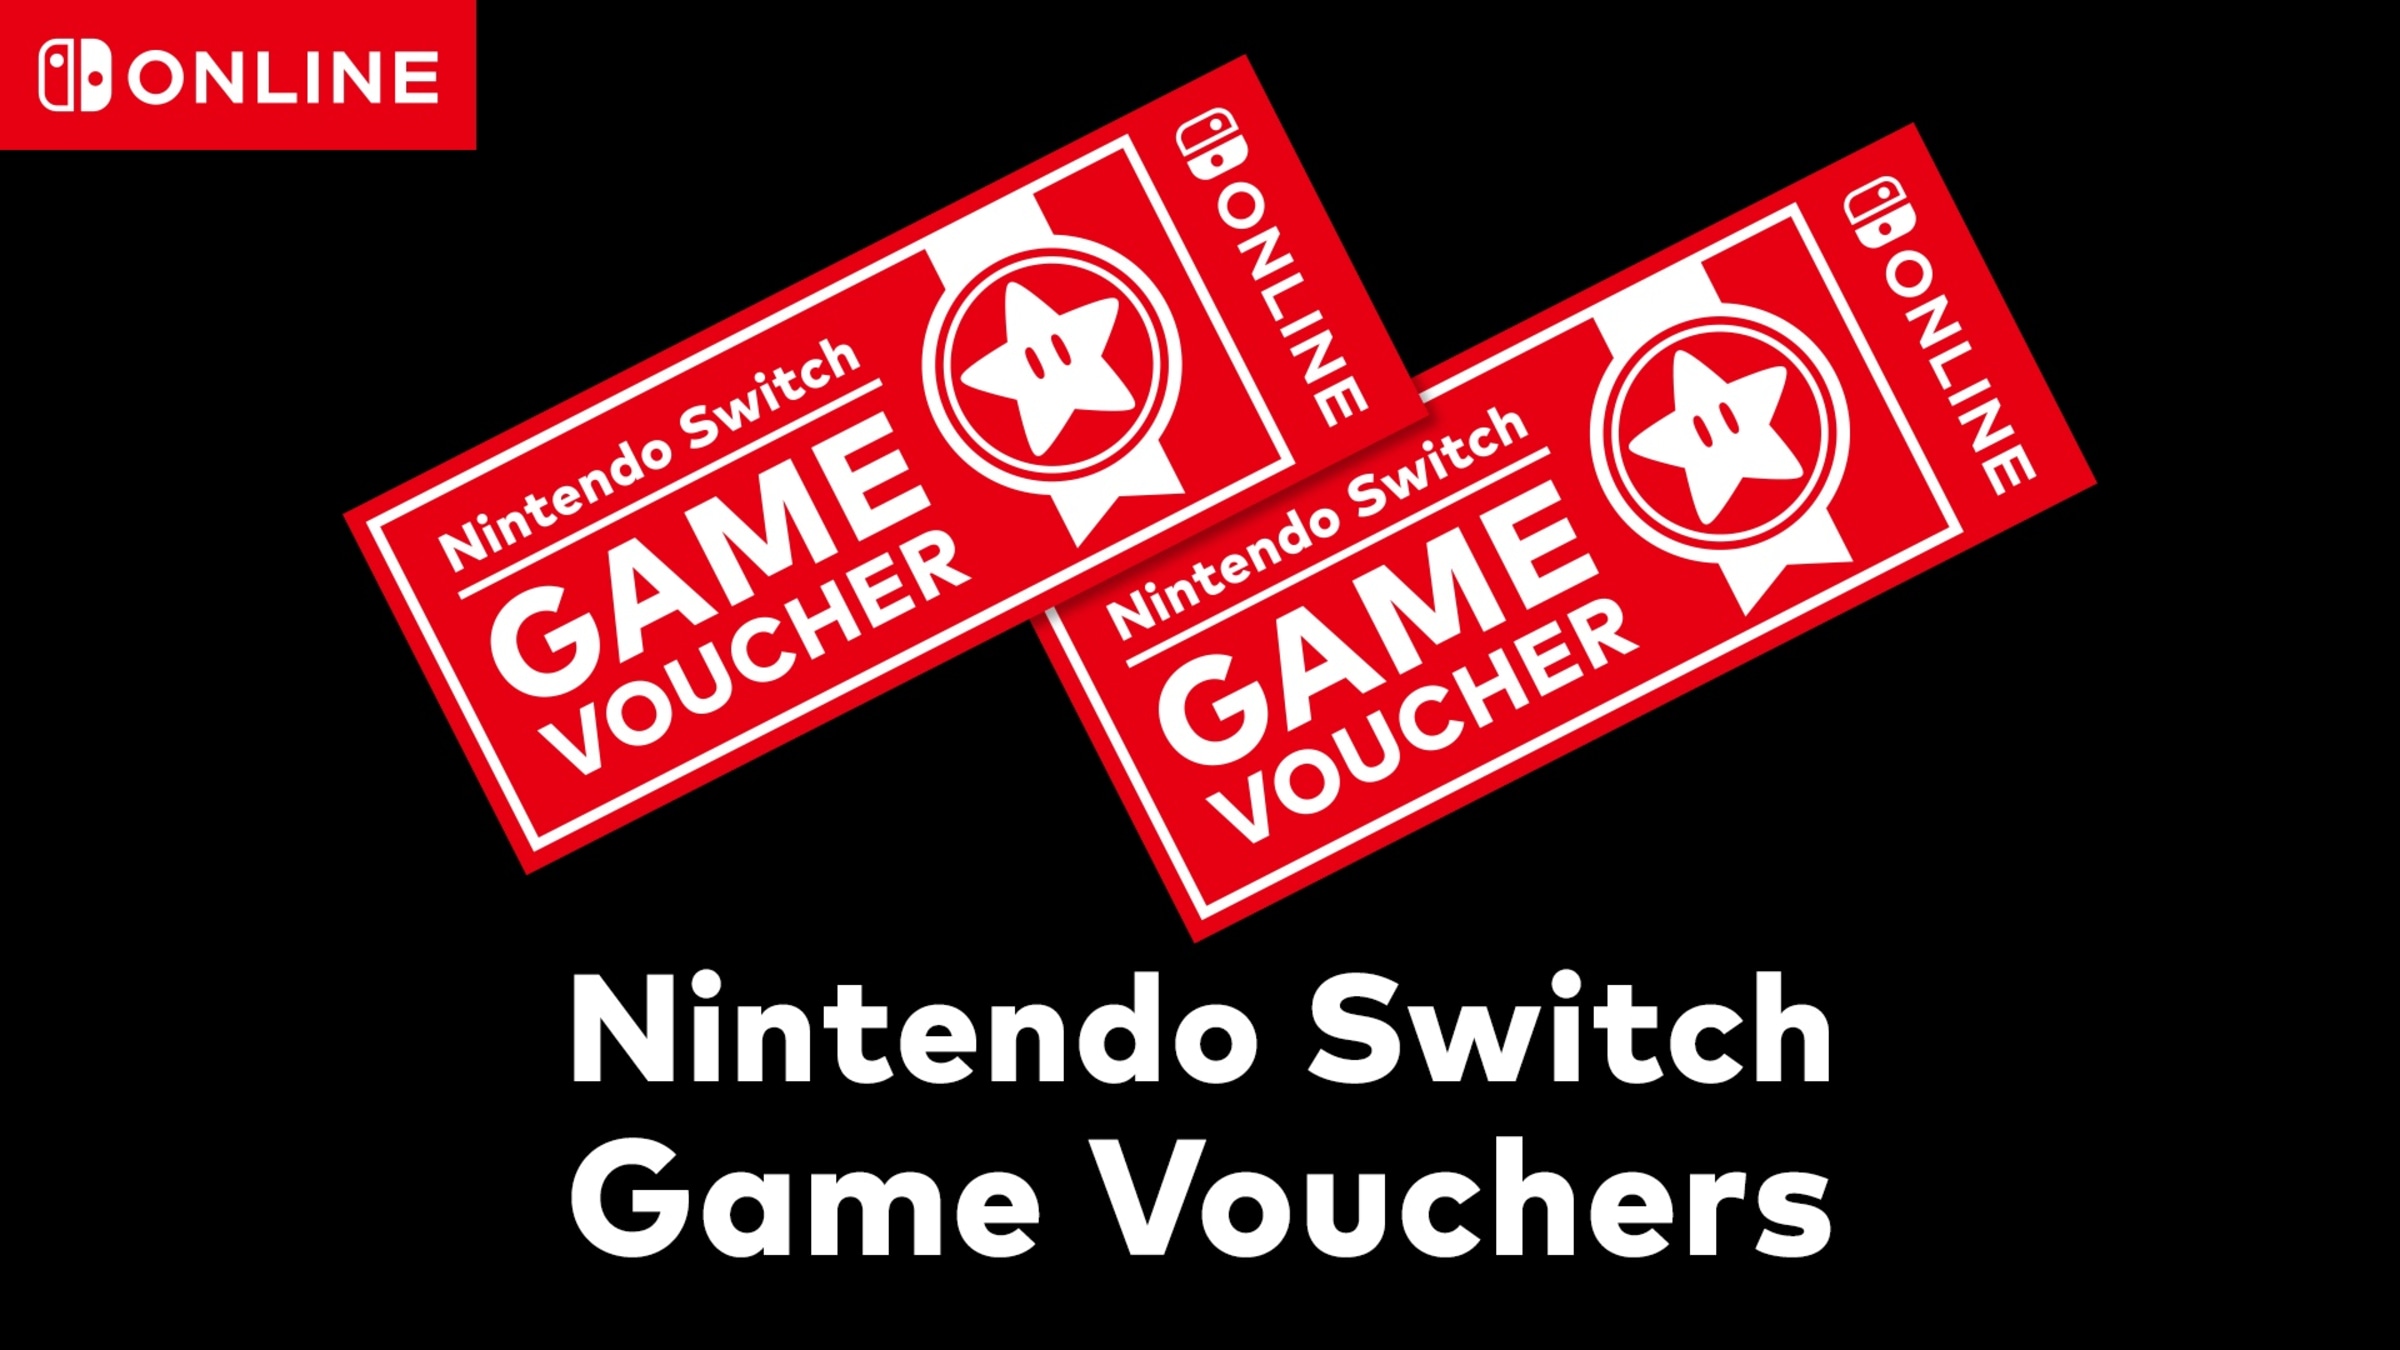 Nintendo Switch Game Vouchers for Nintendo Switch - Nintendo Official